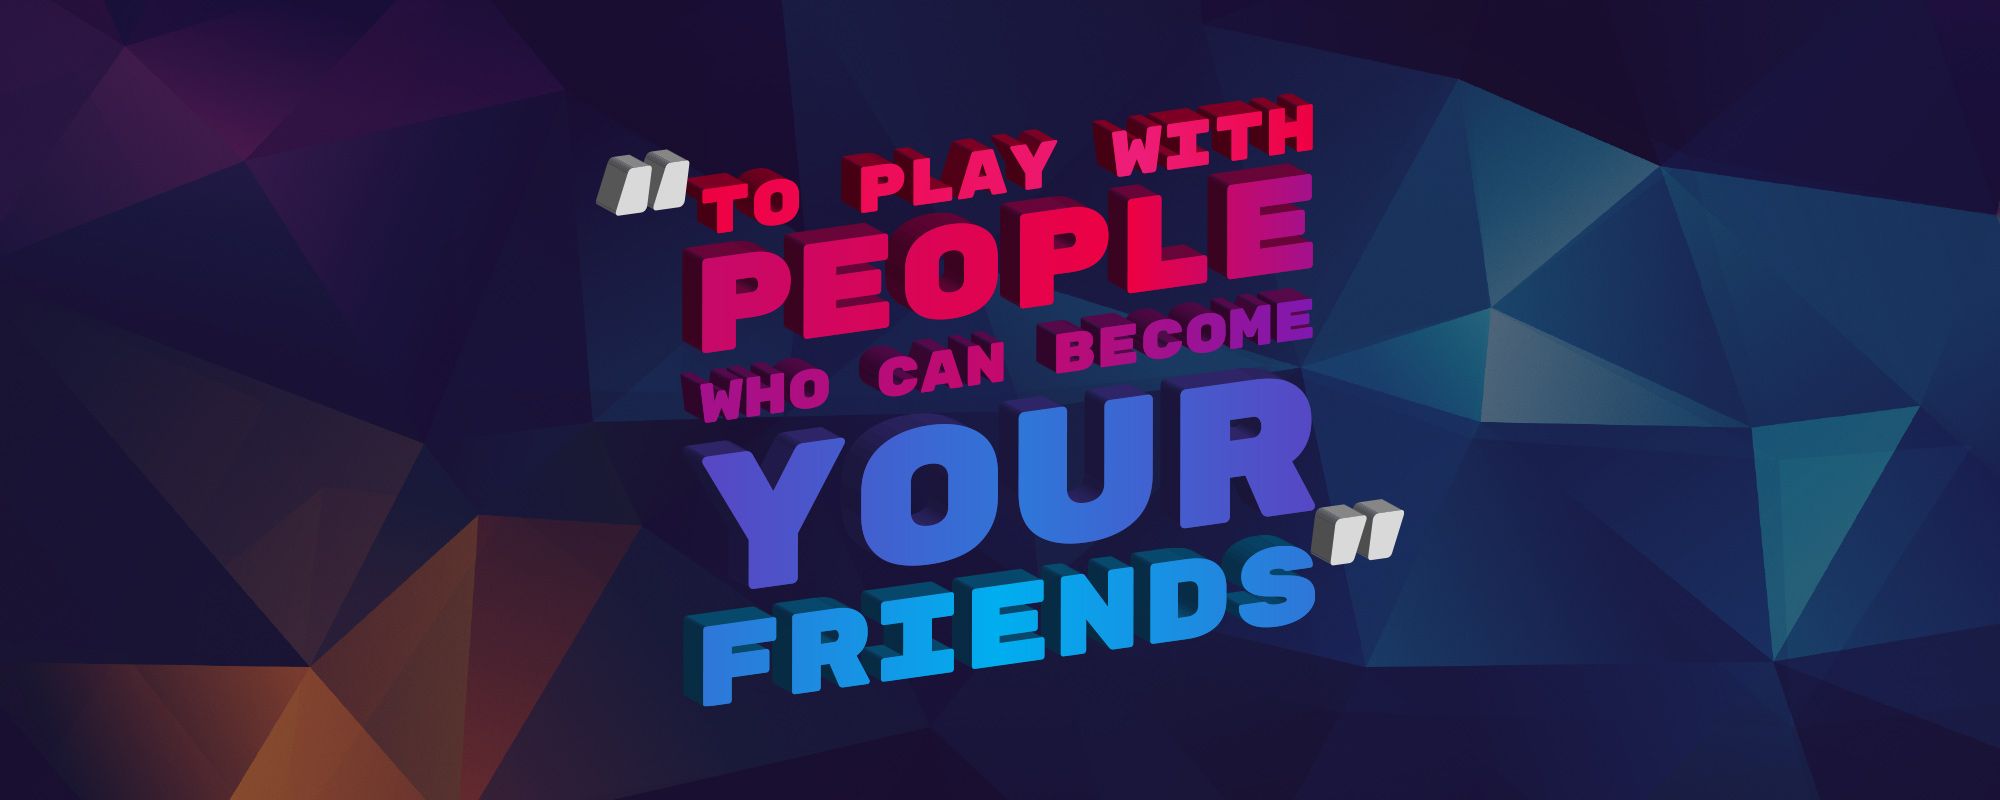 Friendship, Ambition & Love - Real Quotes from Real Players #2